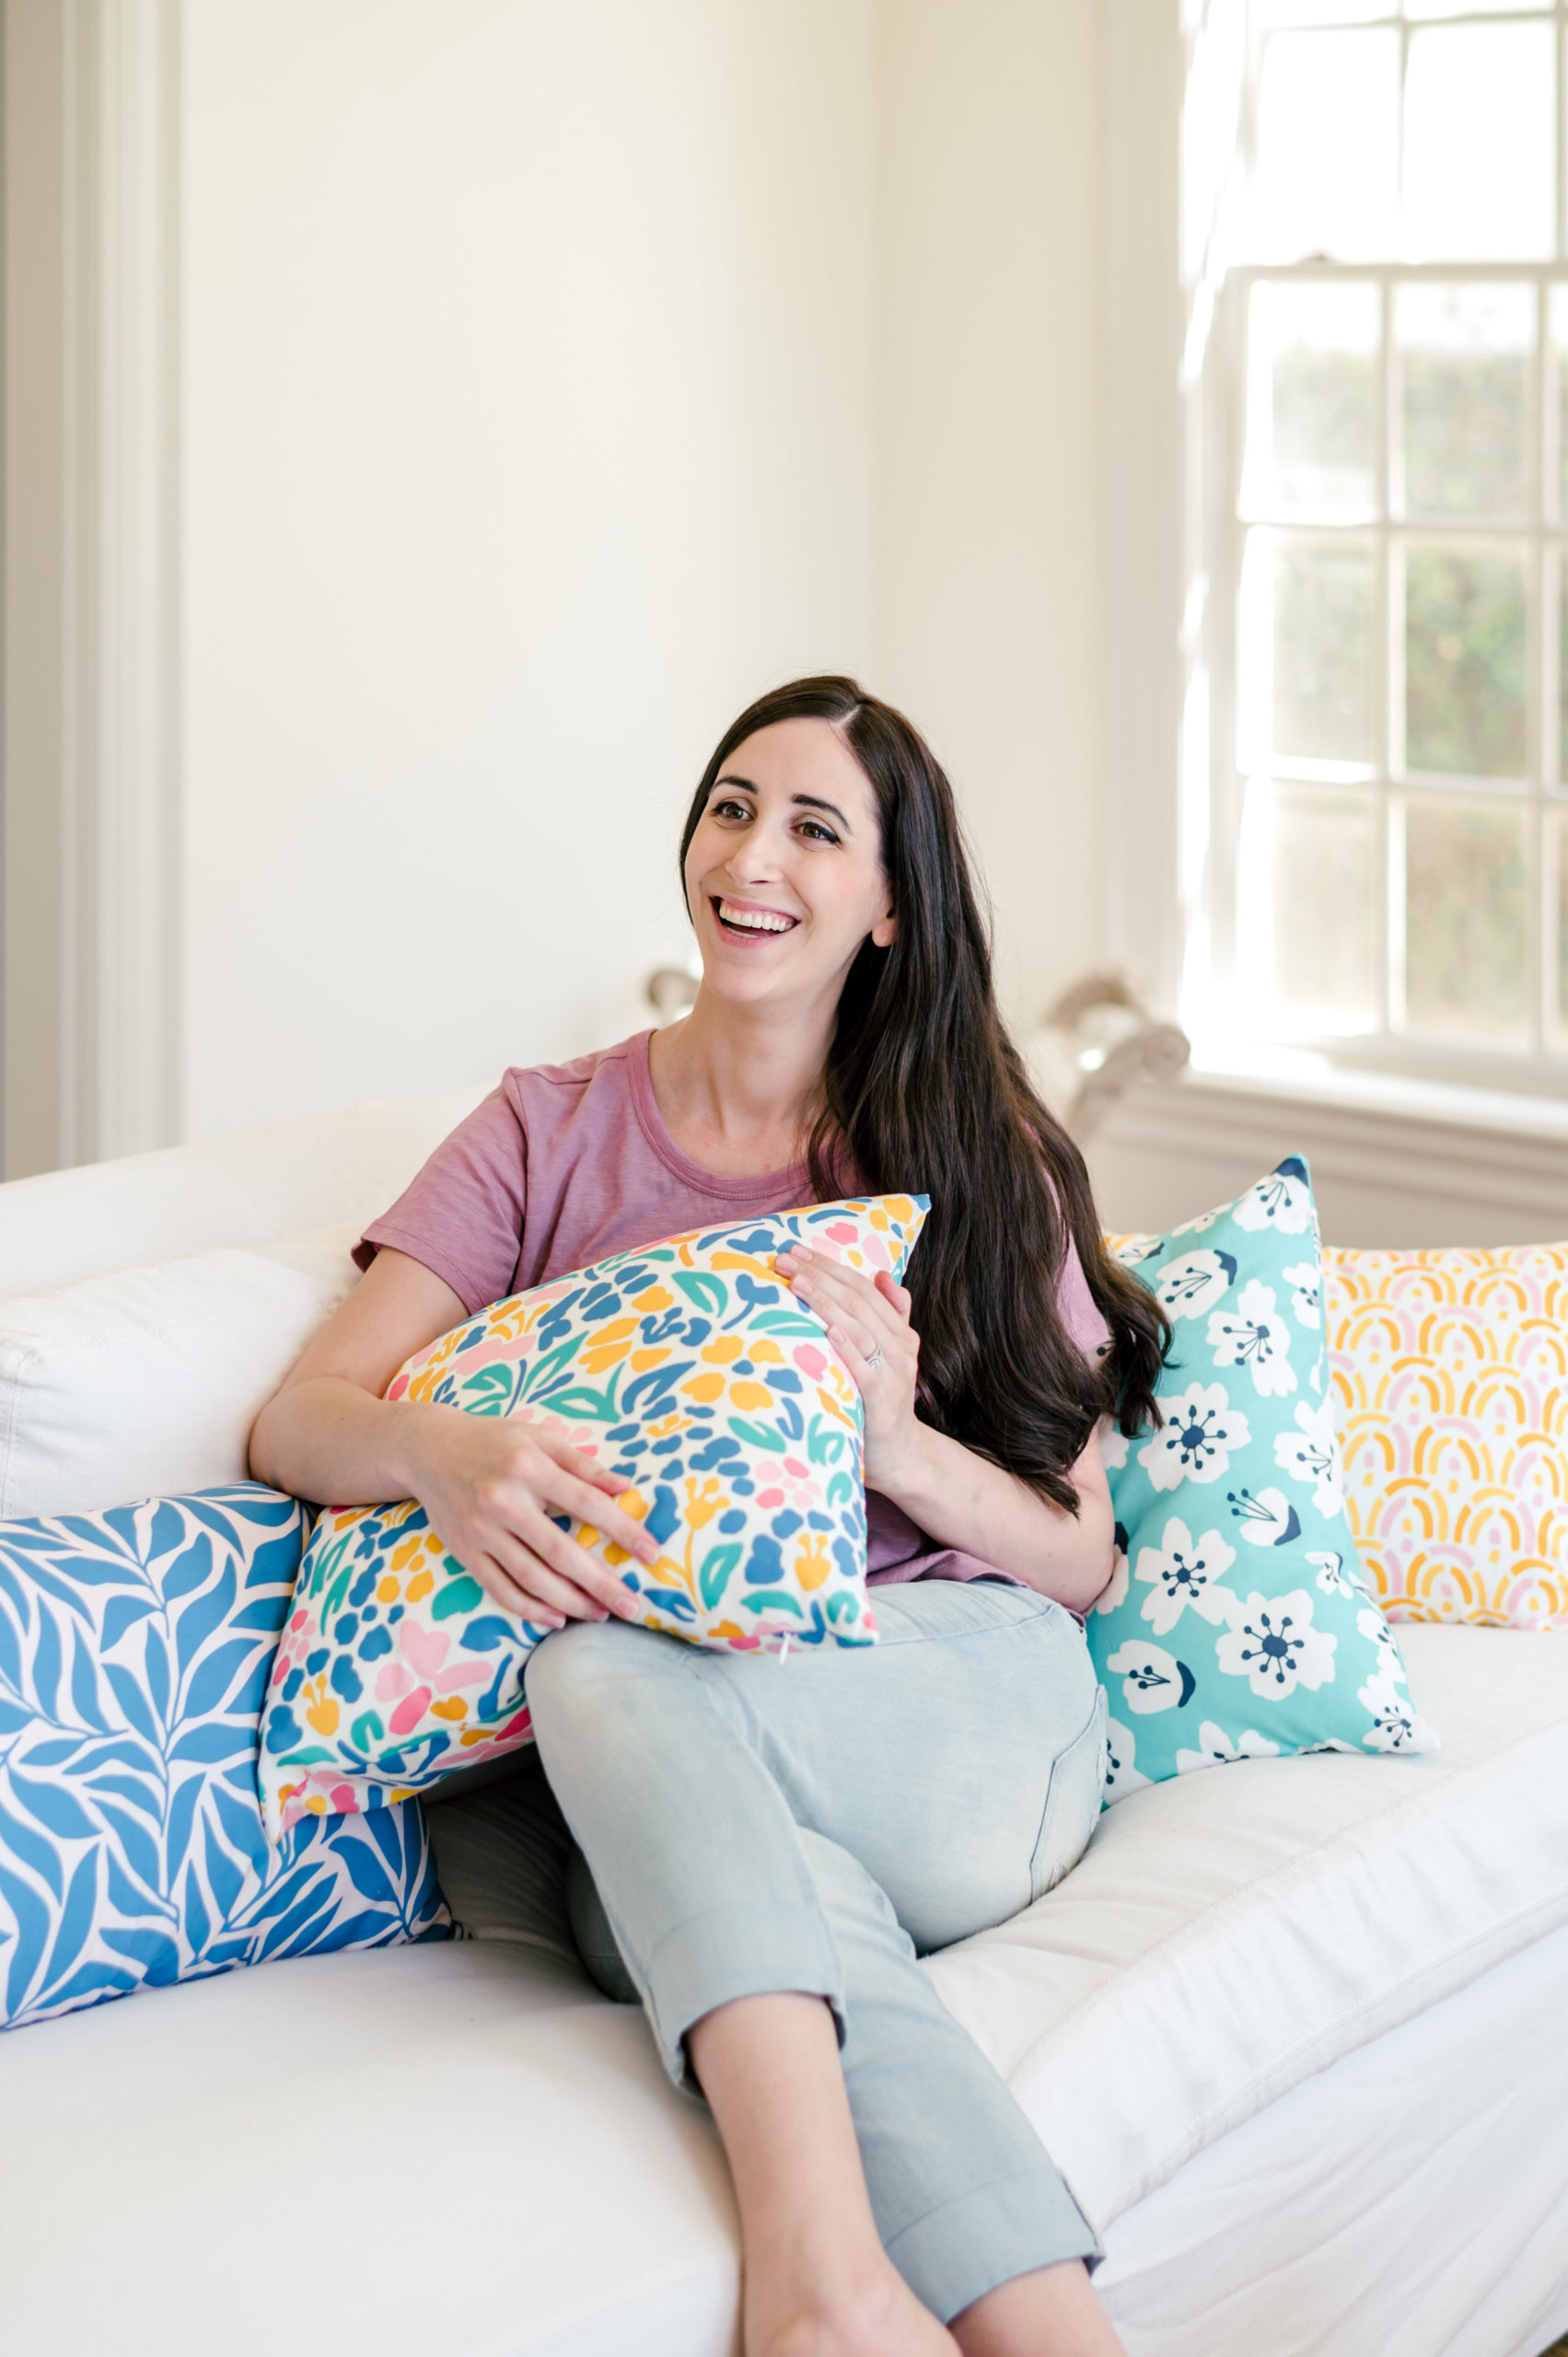 Woman designer sitting on a white couch holding colorful pillows that she designed herself smiling for her branding session